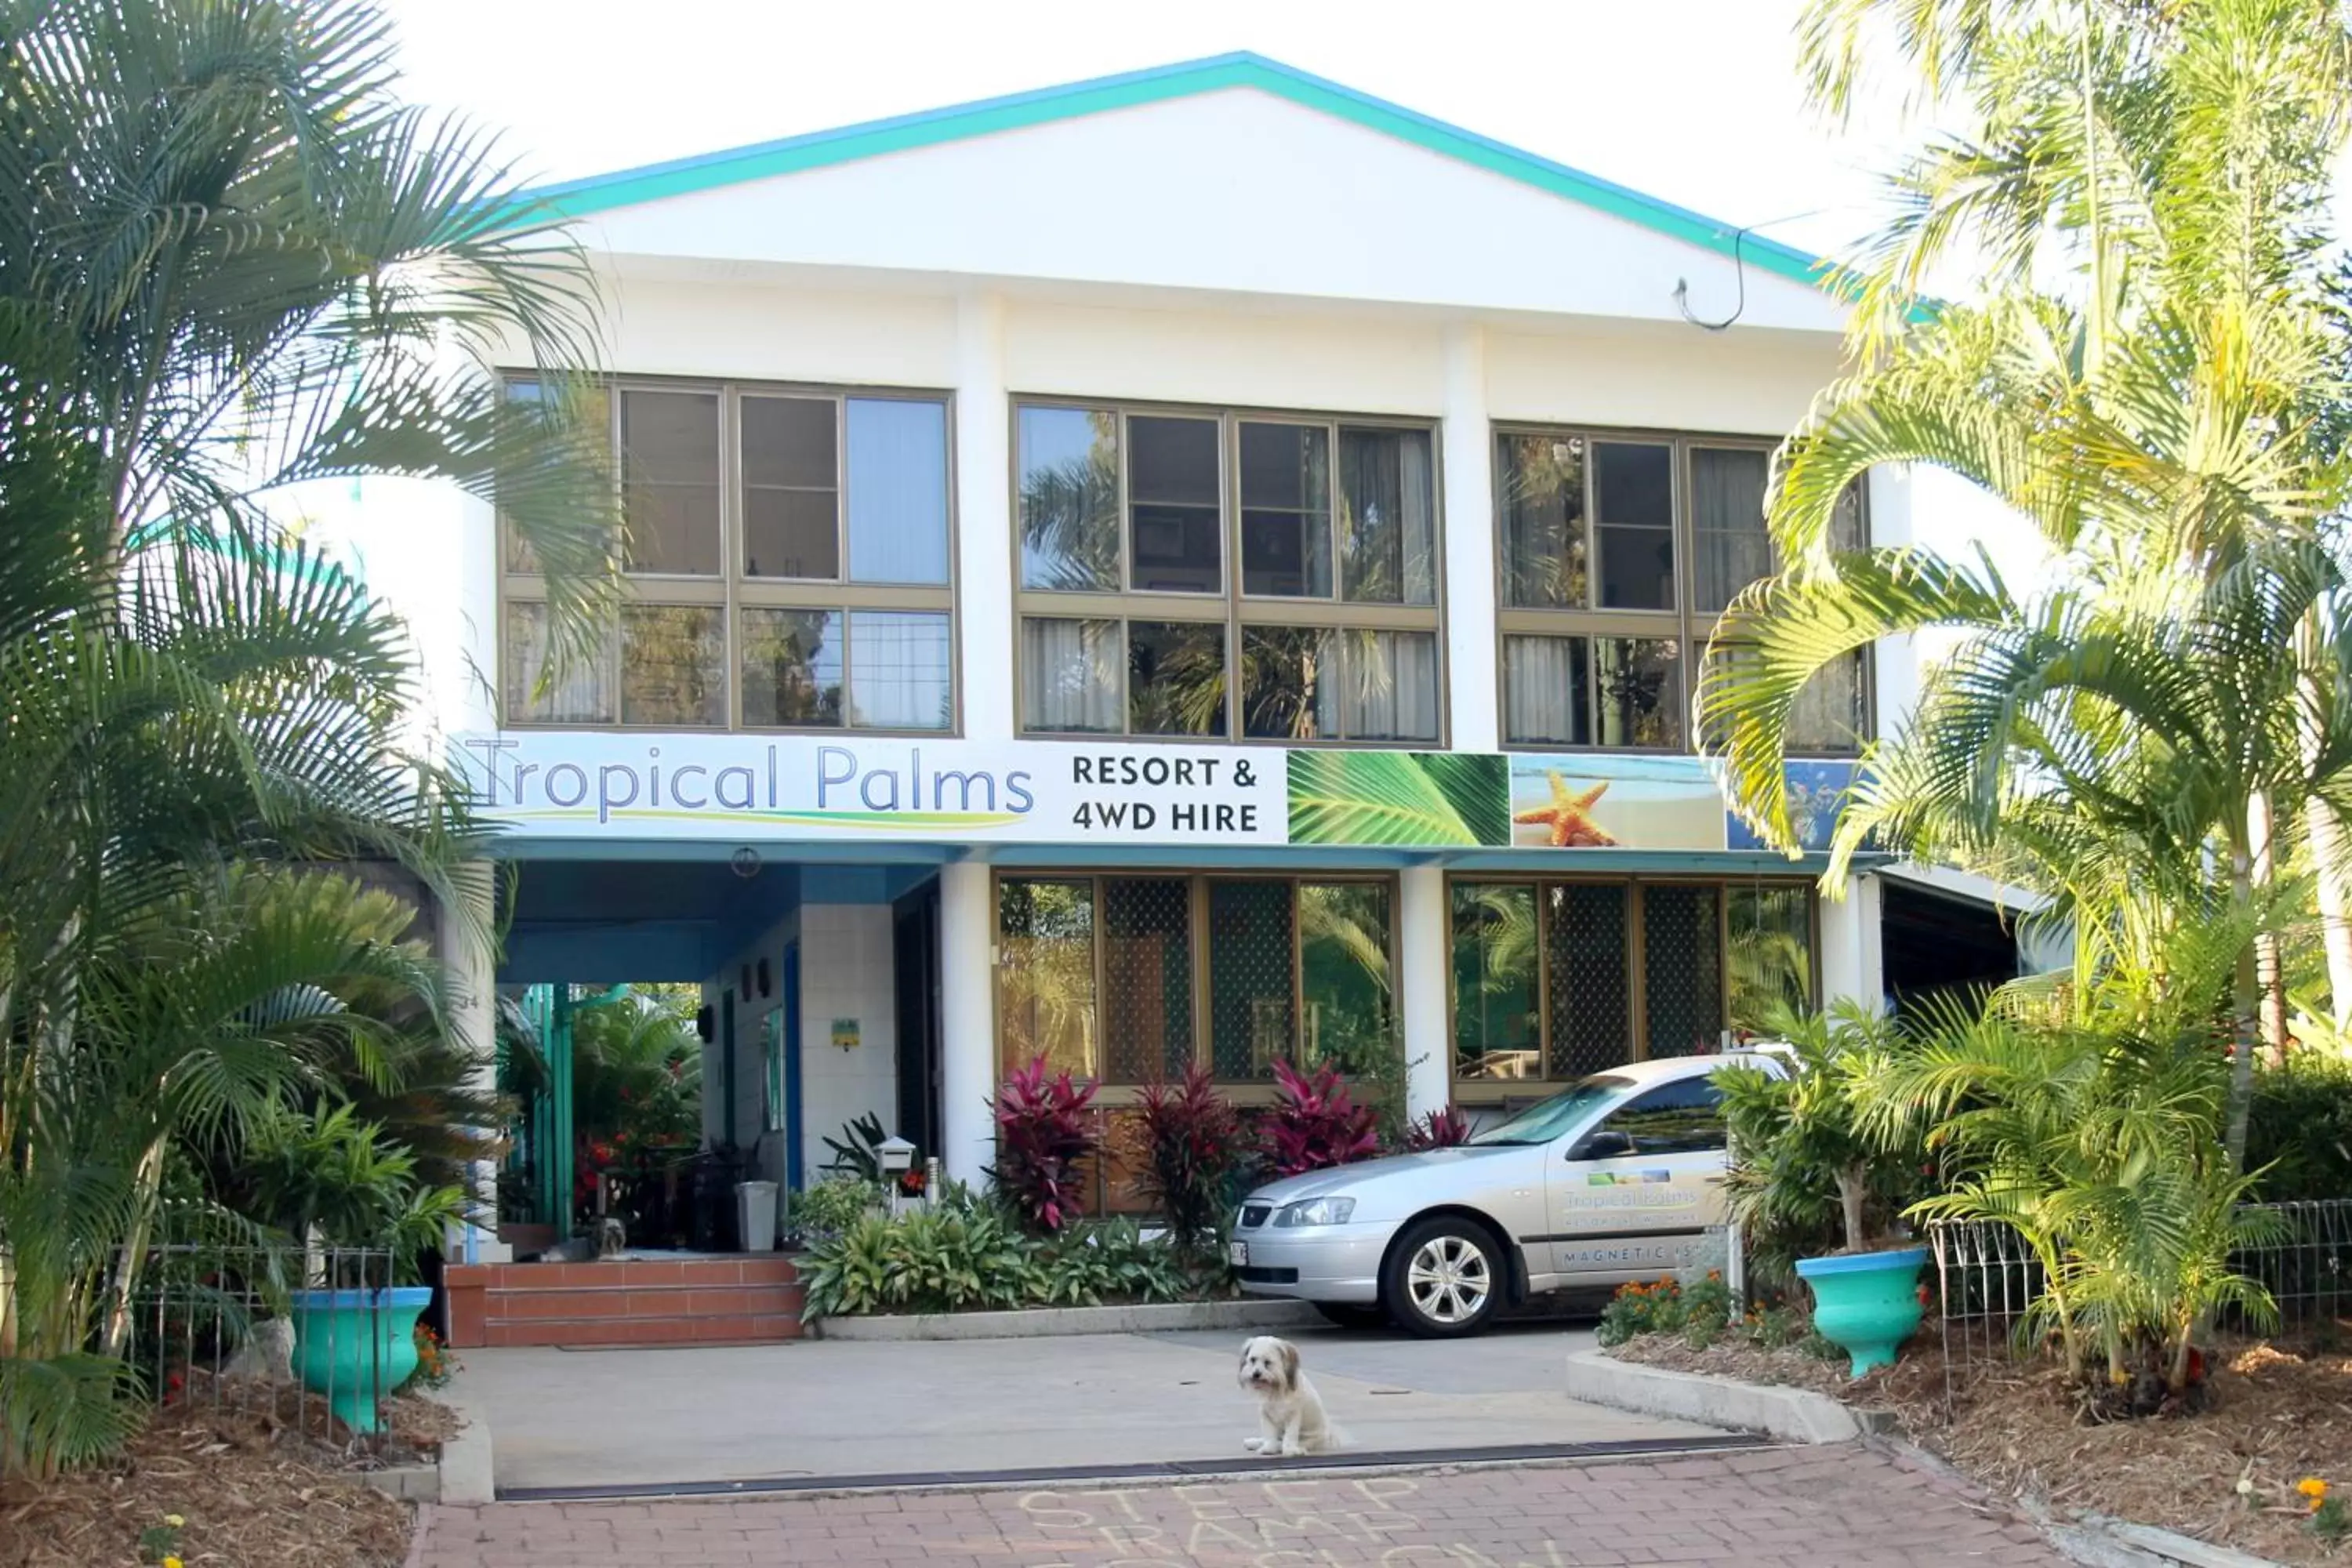 Facade/entrance, Property Building in Tropical Palms Resort & 4WD Hire